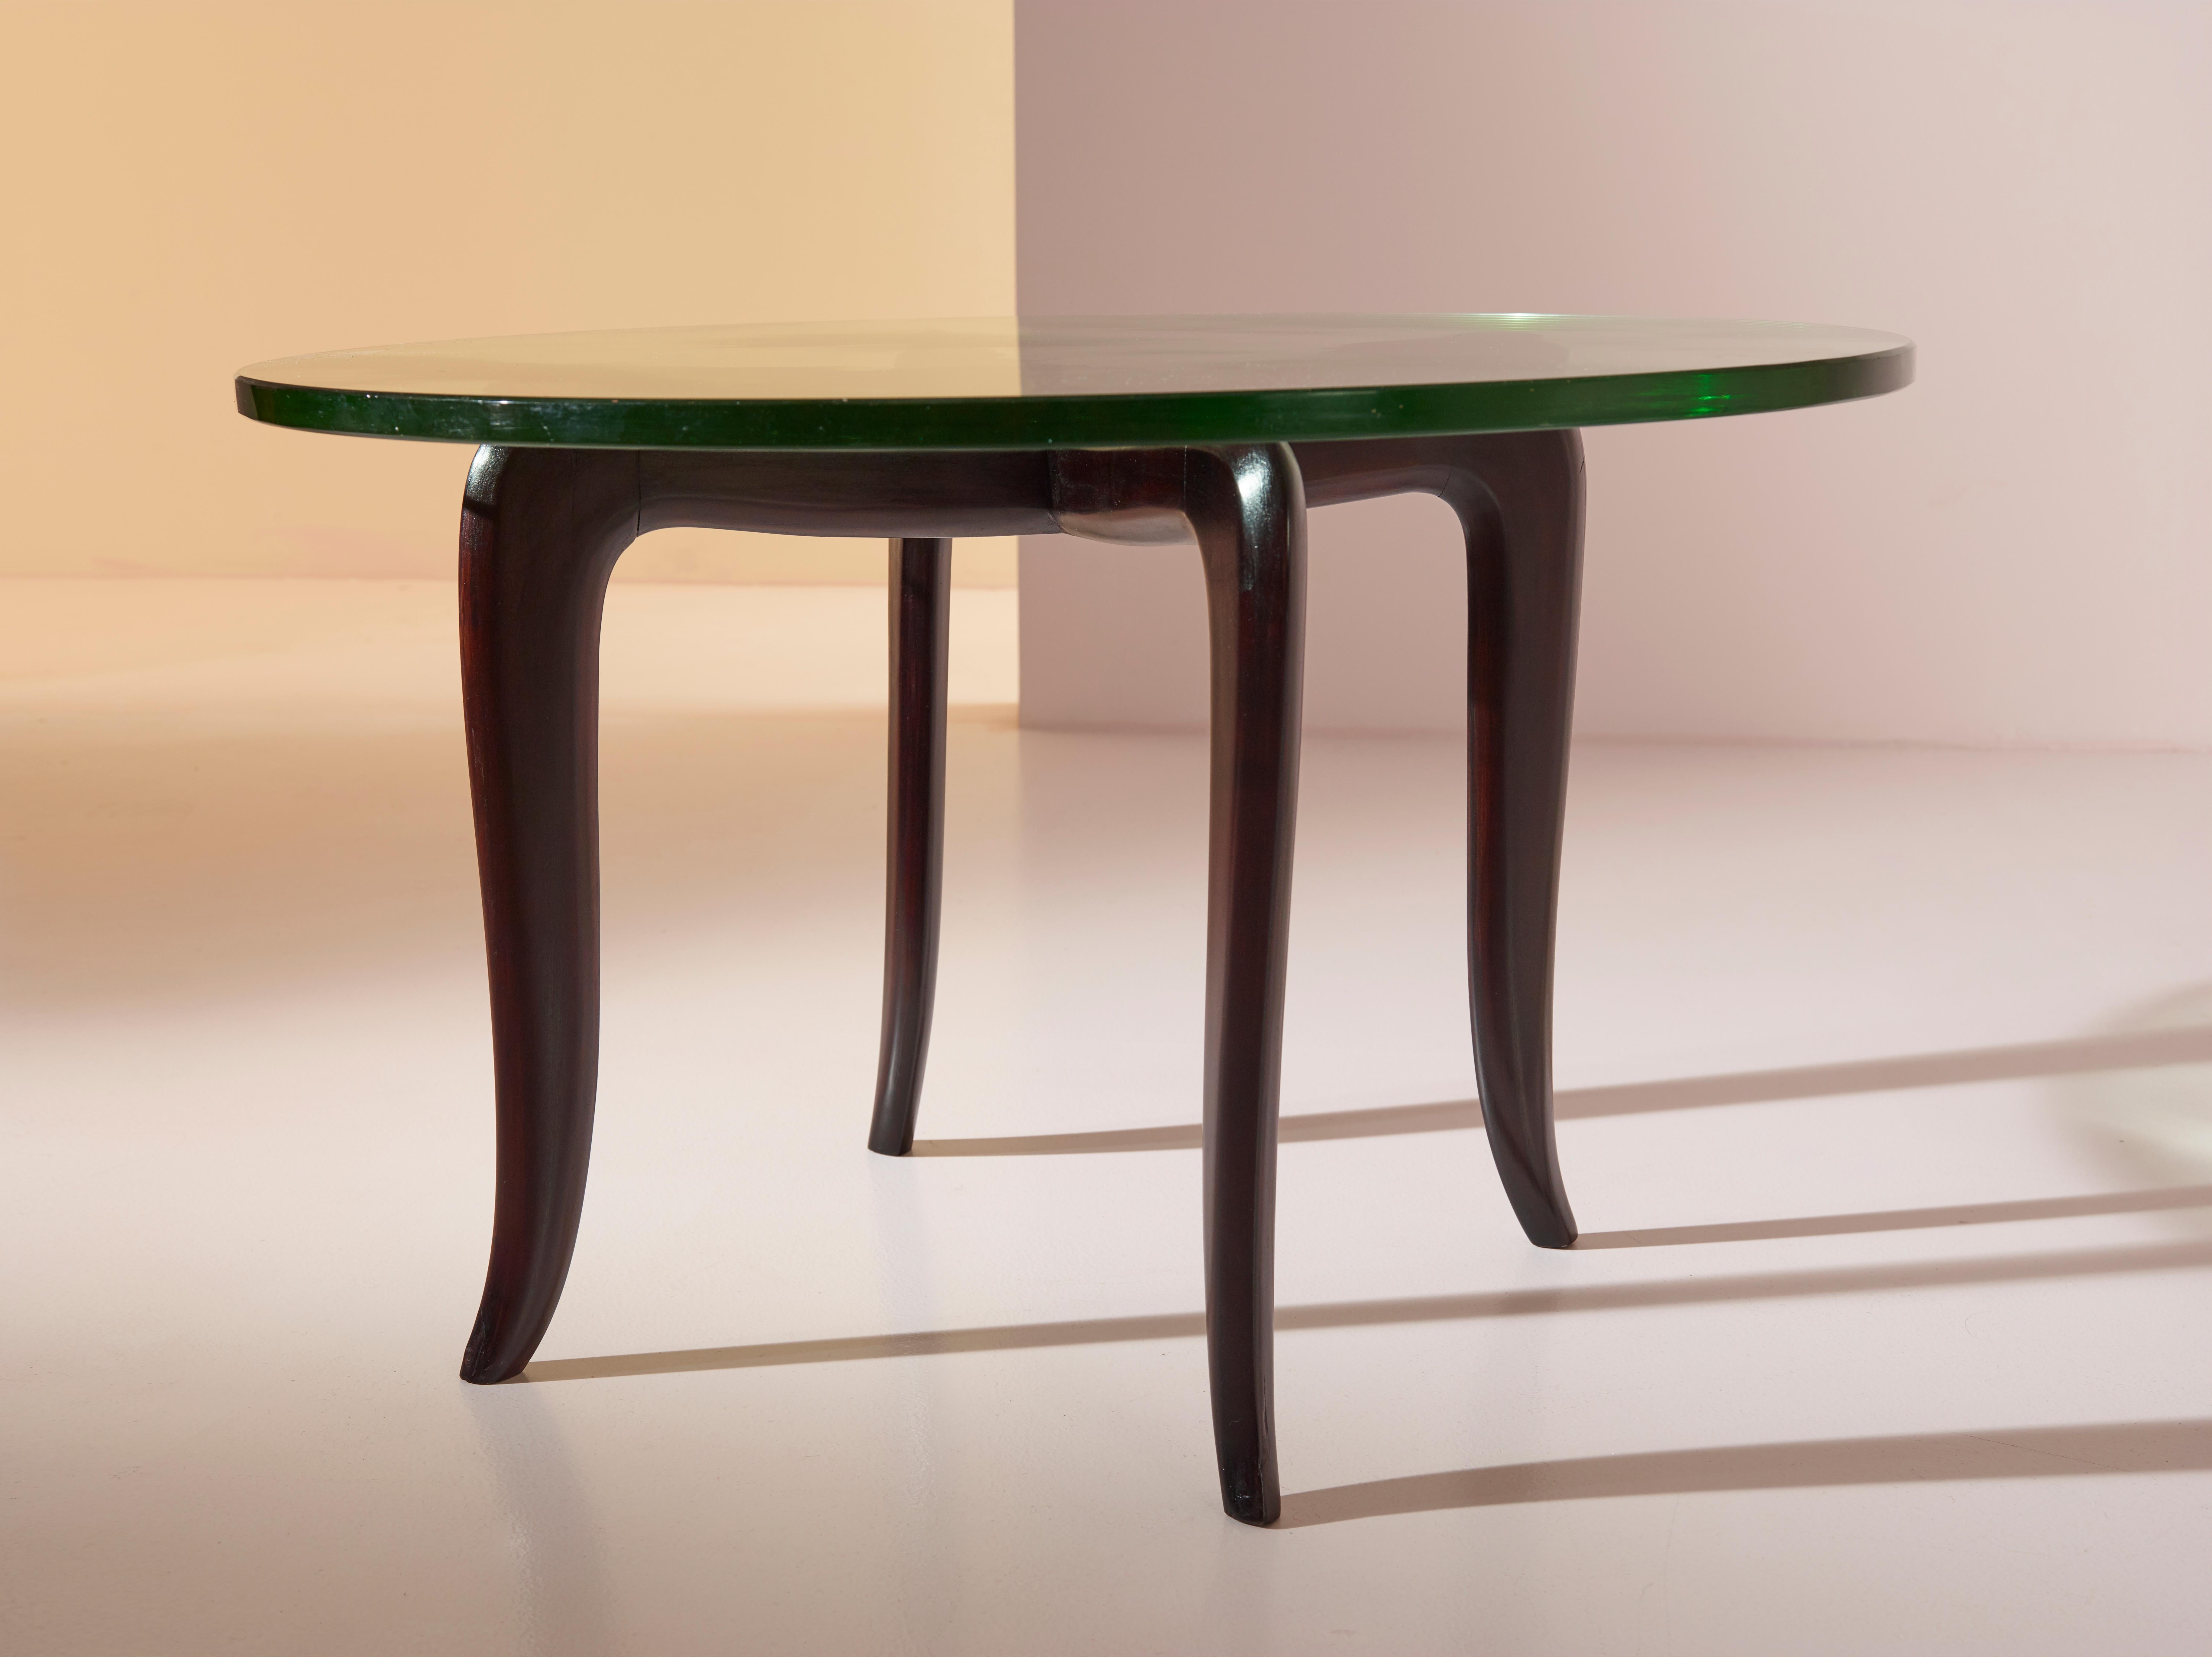 Guglielmo Ulrich coffee table made of lacquered wood and glass, Italy, 1940s For Sale 1